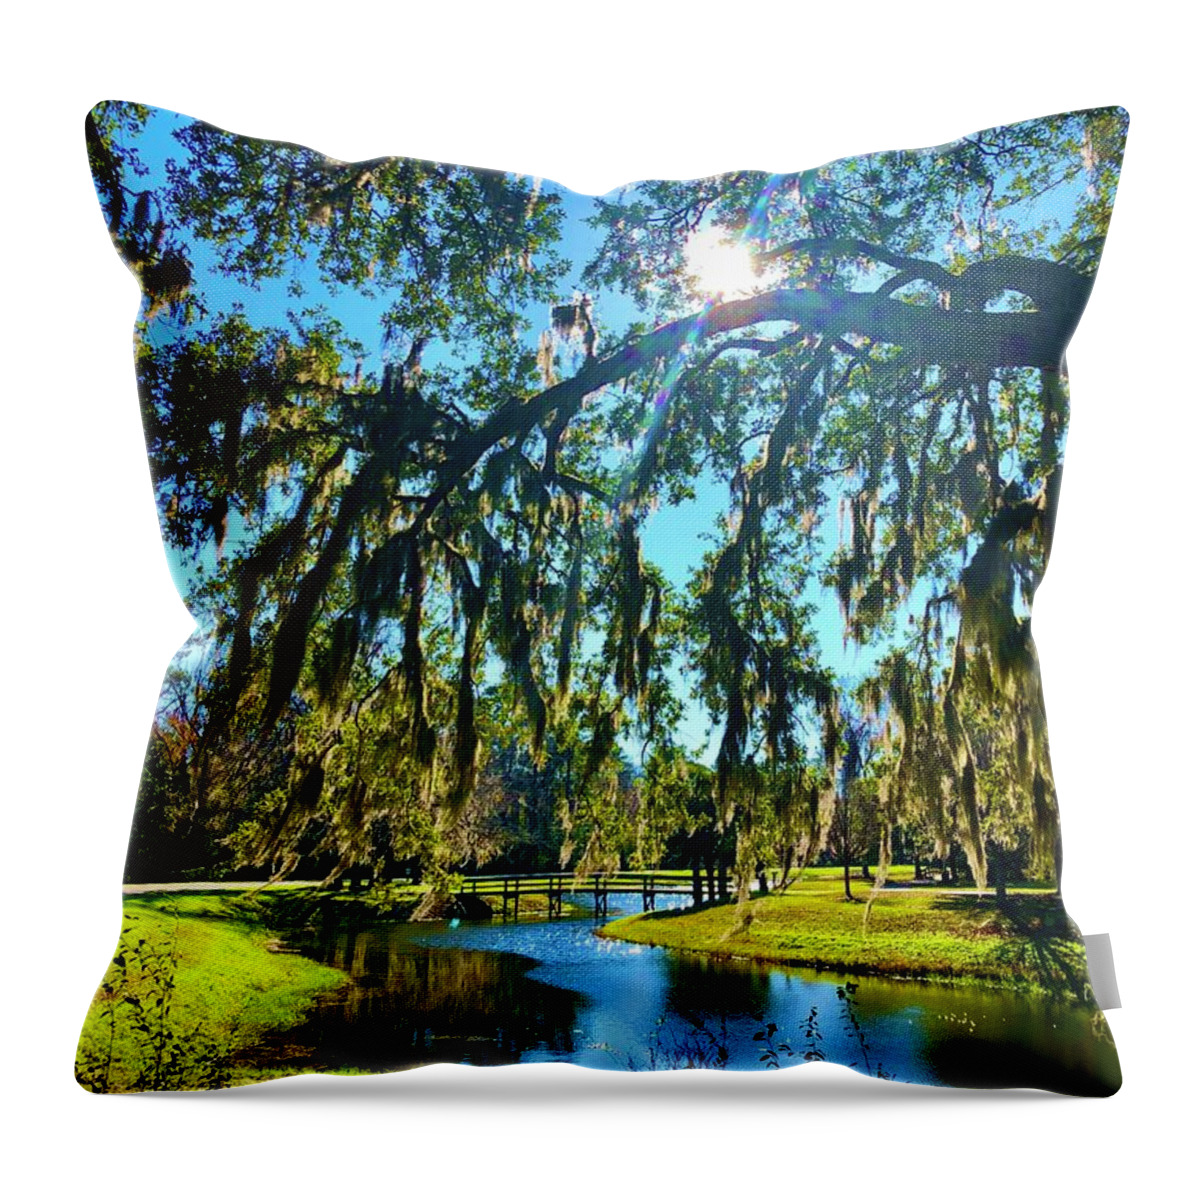 Light Throw Pillow featuring the photograph Landscape 1 by Michael Stothard